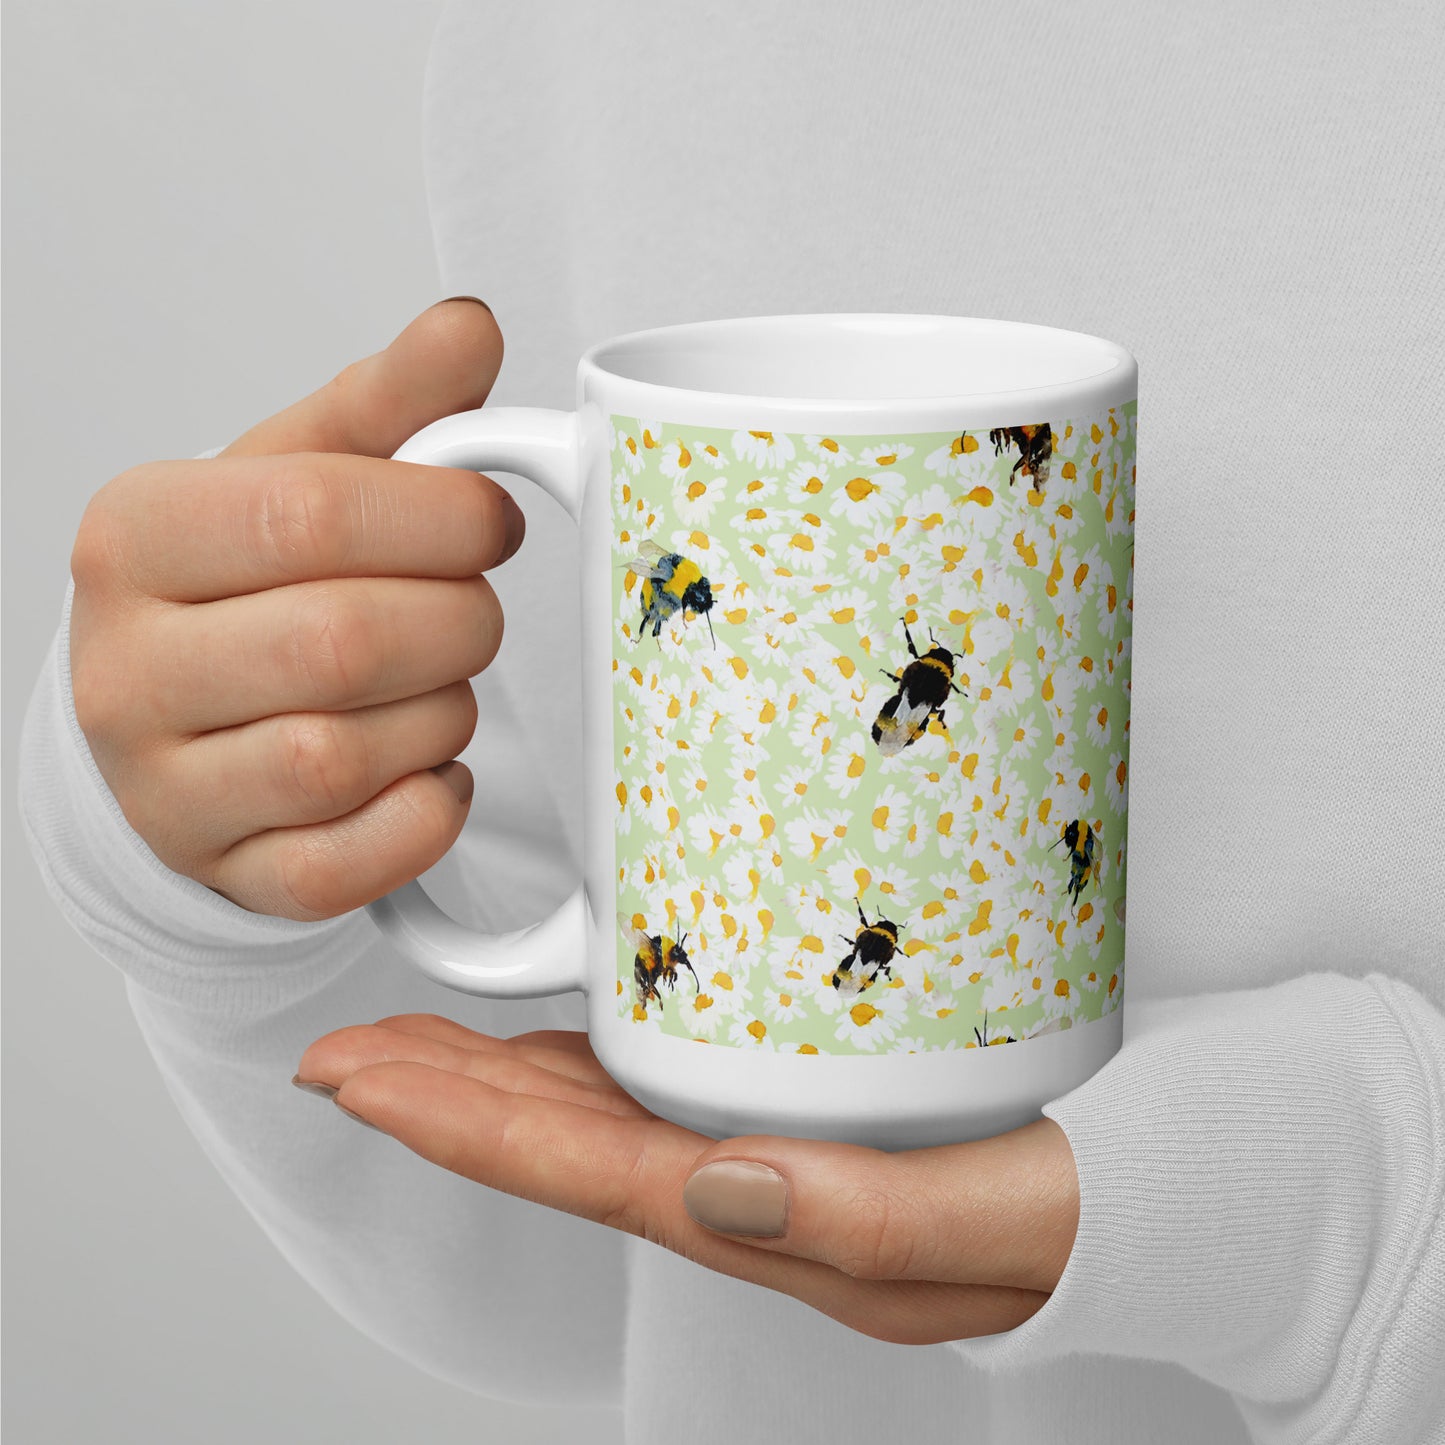 Design Bee and Daisies Mug by Annie Grant